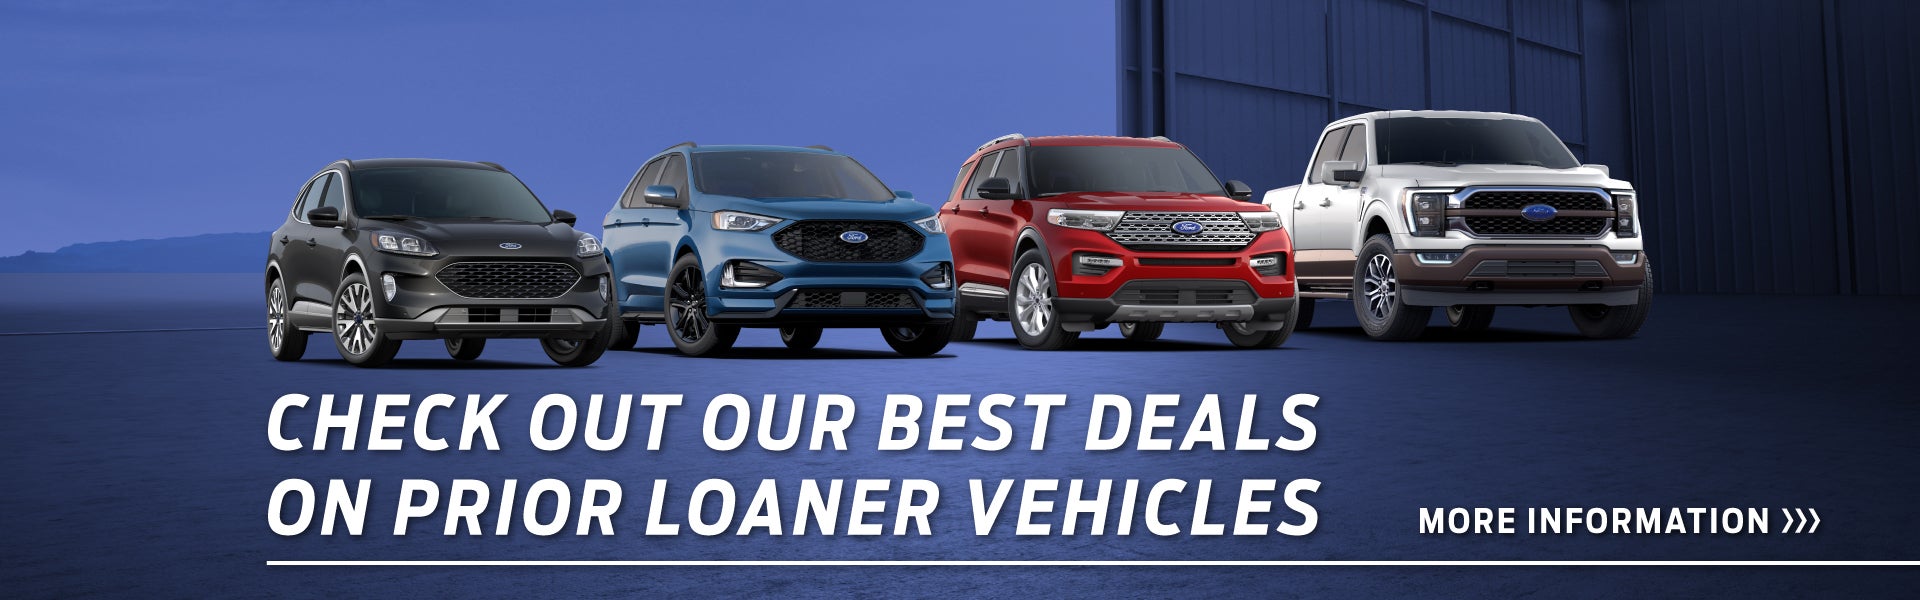 Check Out Our Best Deals on Prior Loaner Vehicles 